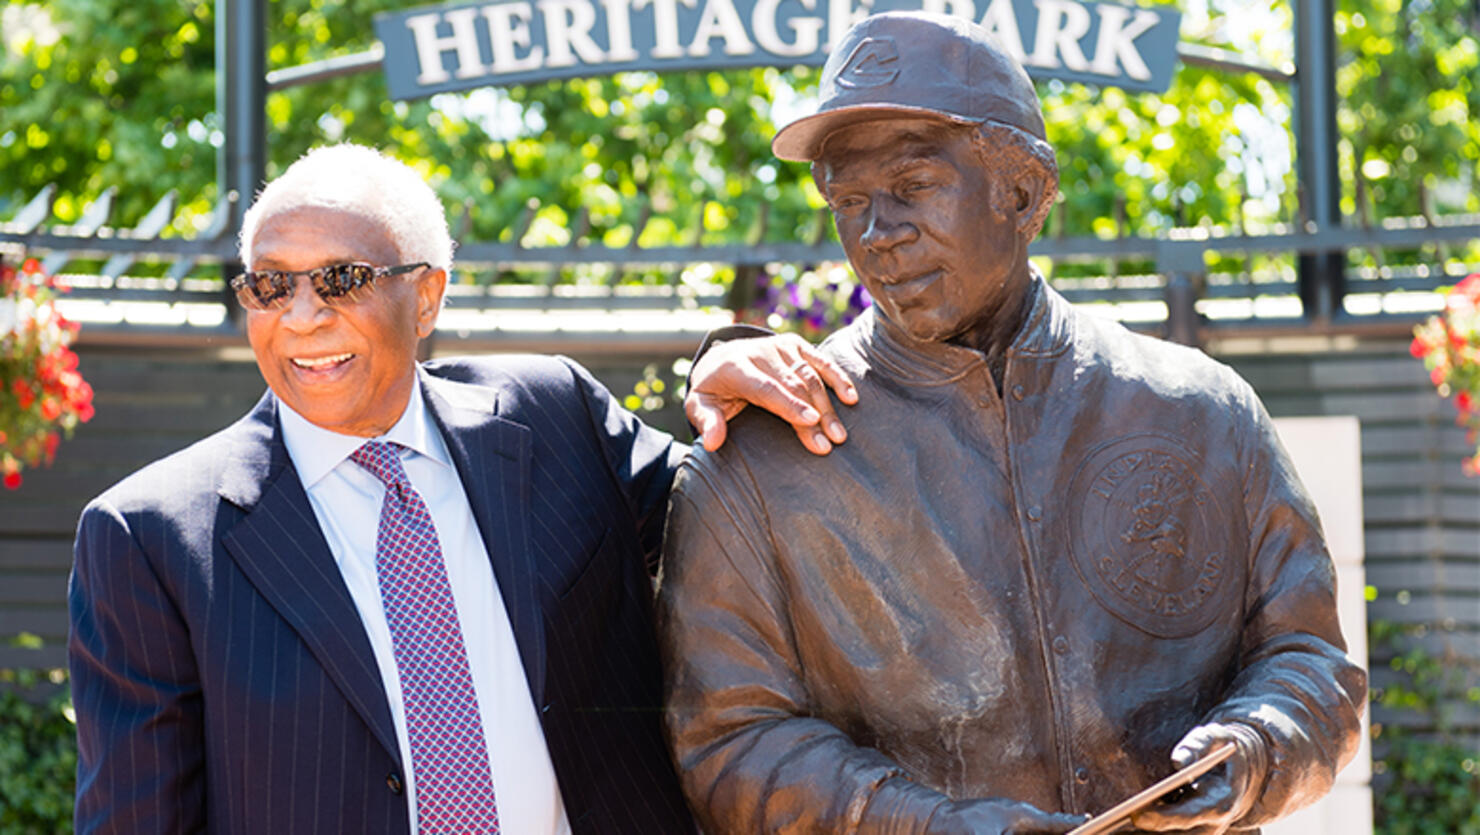 Former Cleveland Indians manager and player Frank Robinson stands with a new statue commemorating his career